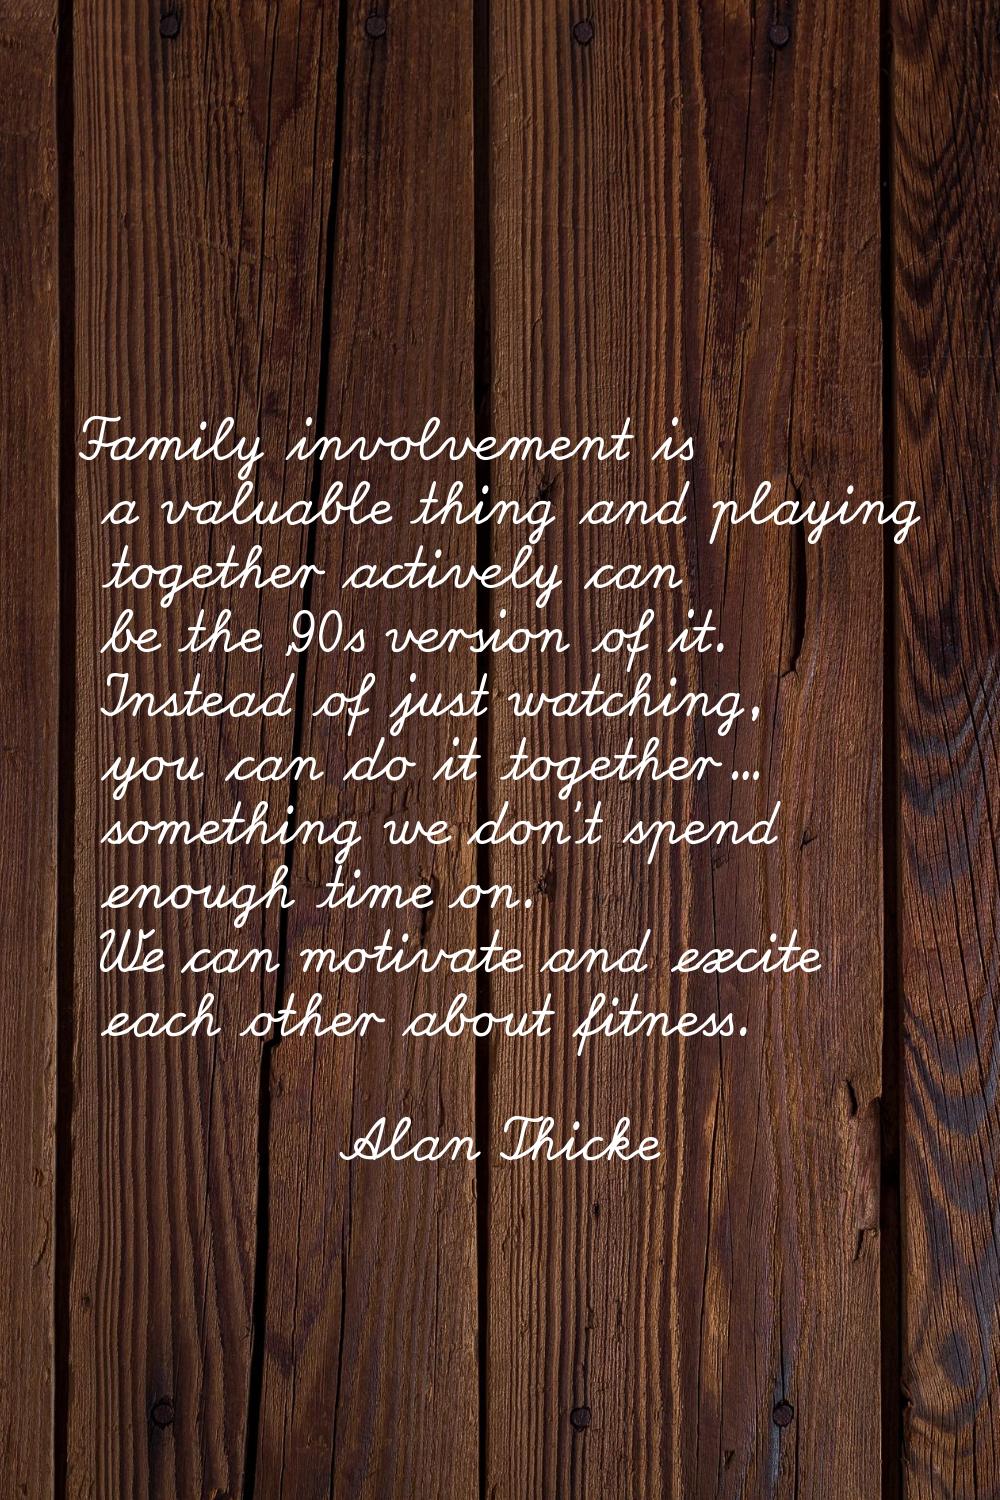 Family involvement is a valuable thing and playing together actively can be the '90s version of it.